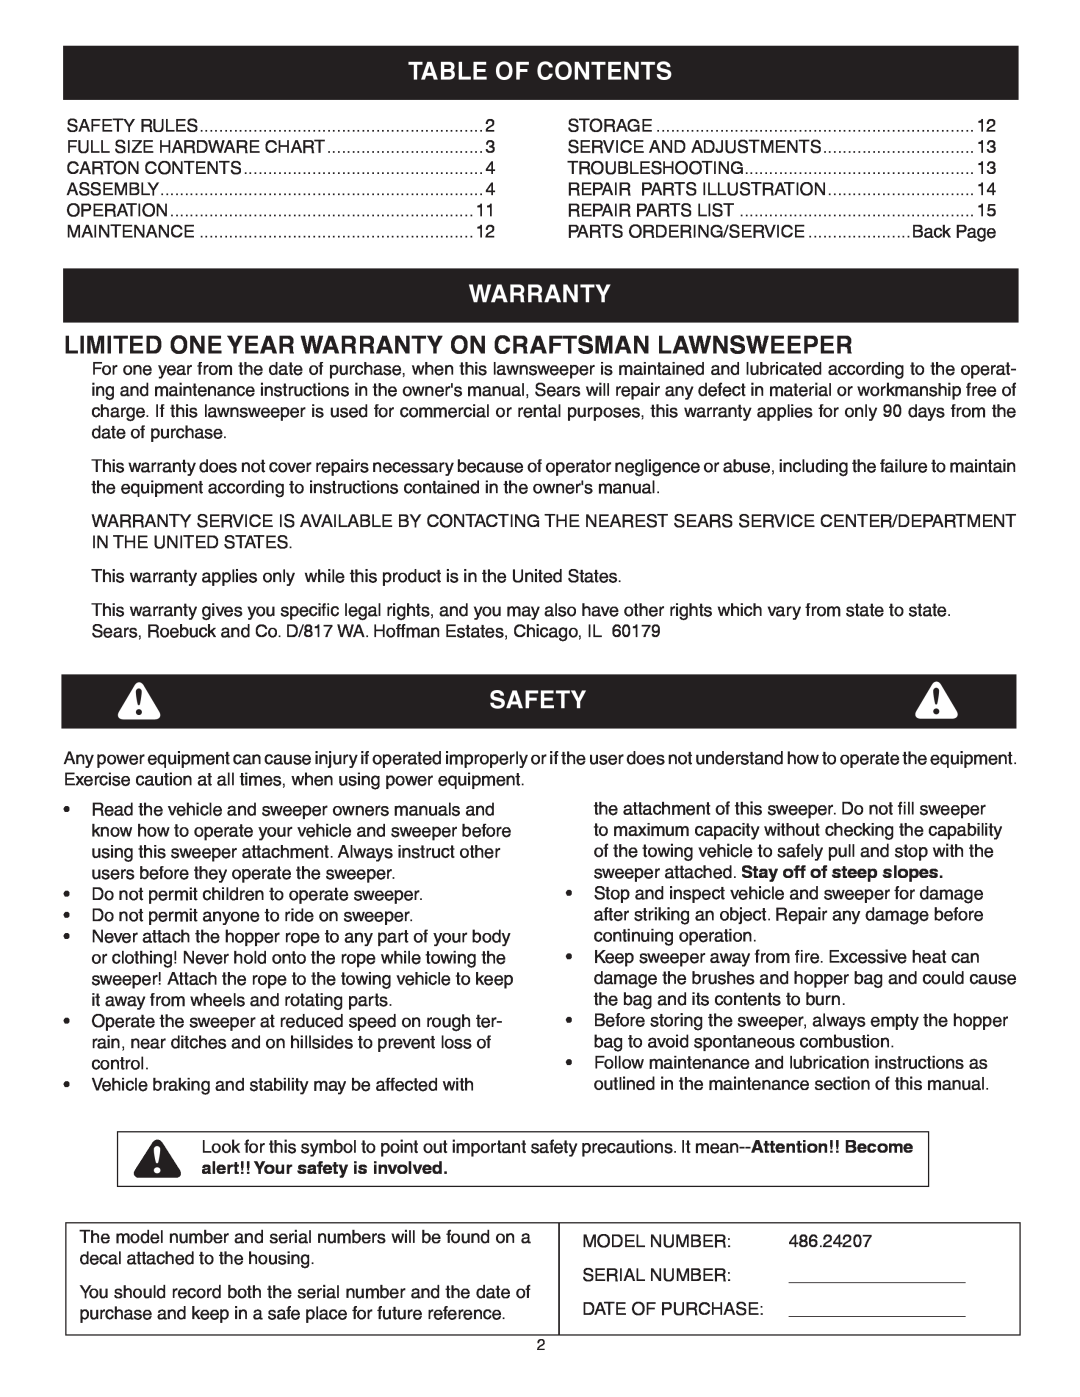 Craftsman 486.24207 owner manual Table Of Contents, Limited One Year Warranty On Craftsman Lawnsweeper, Safety 